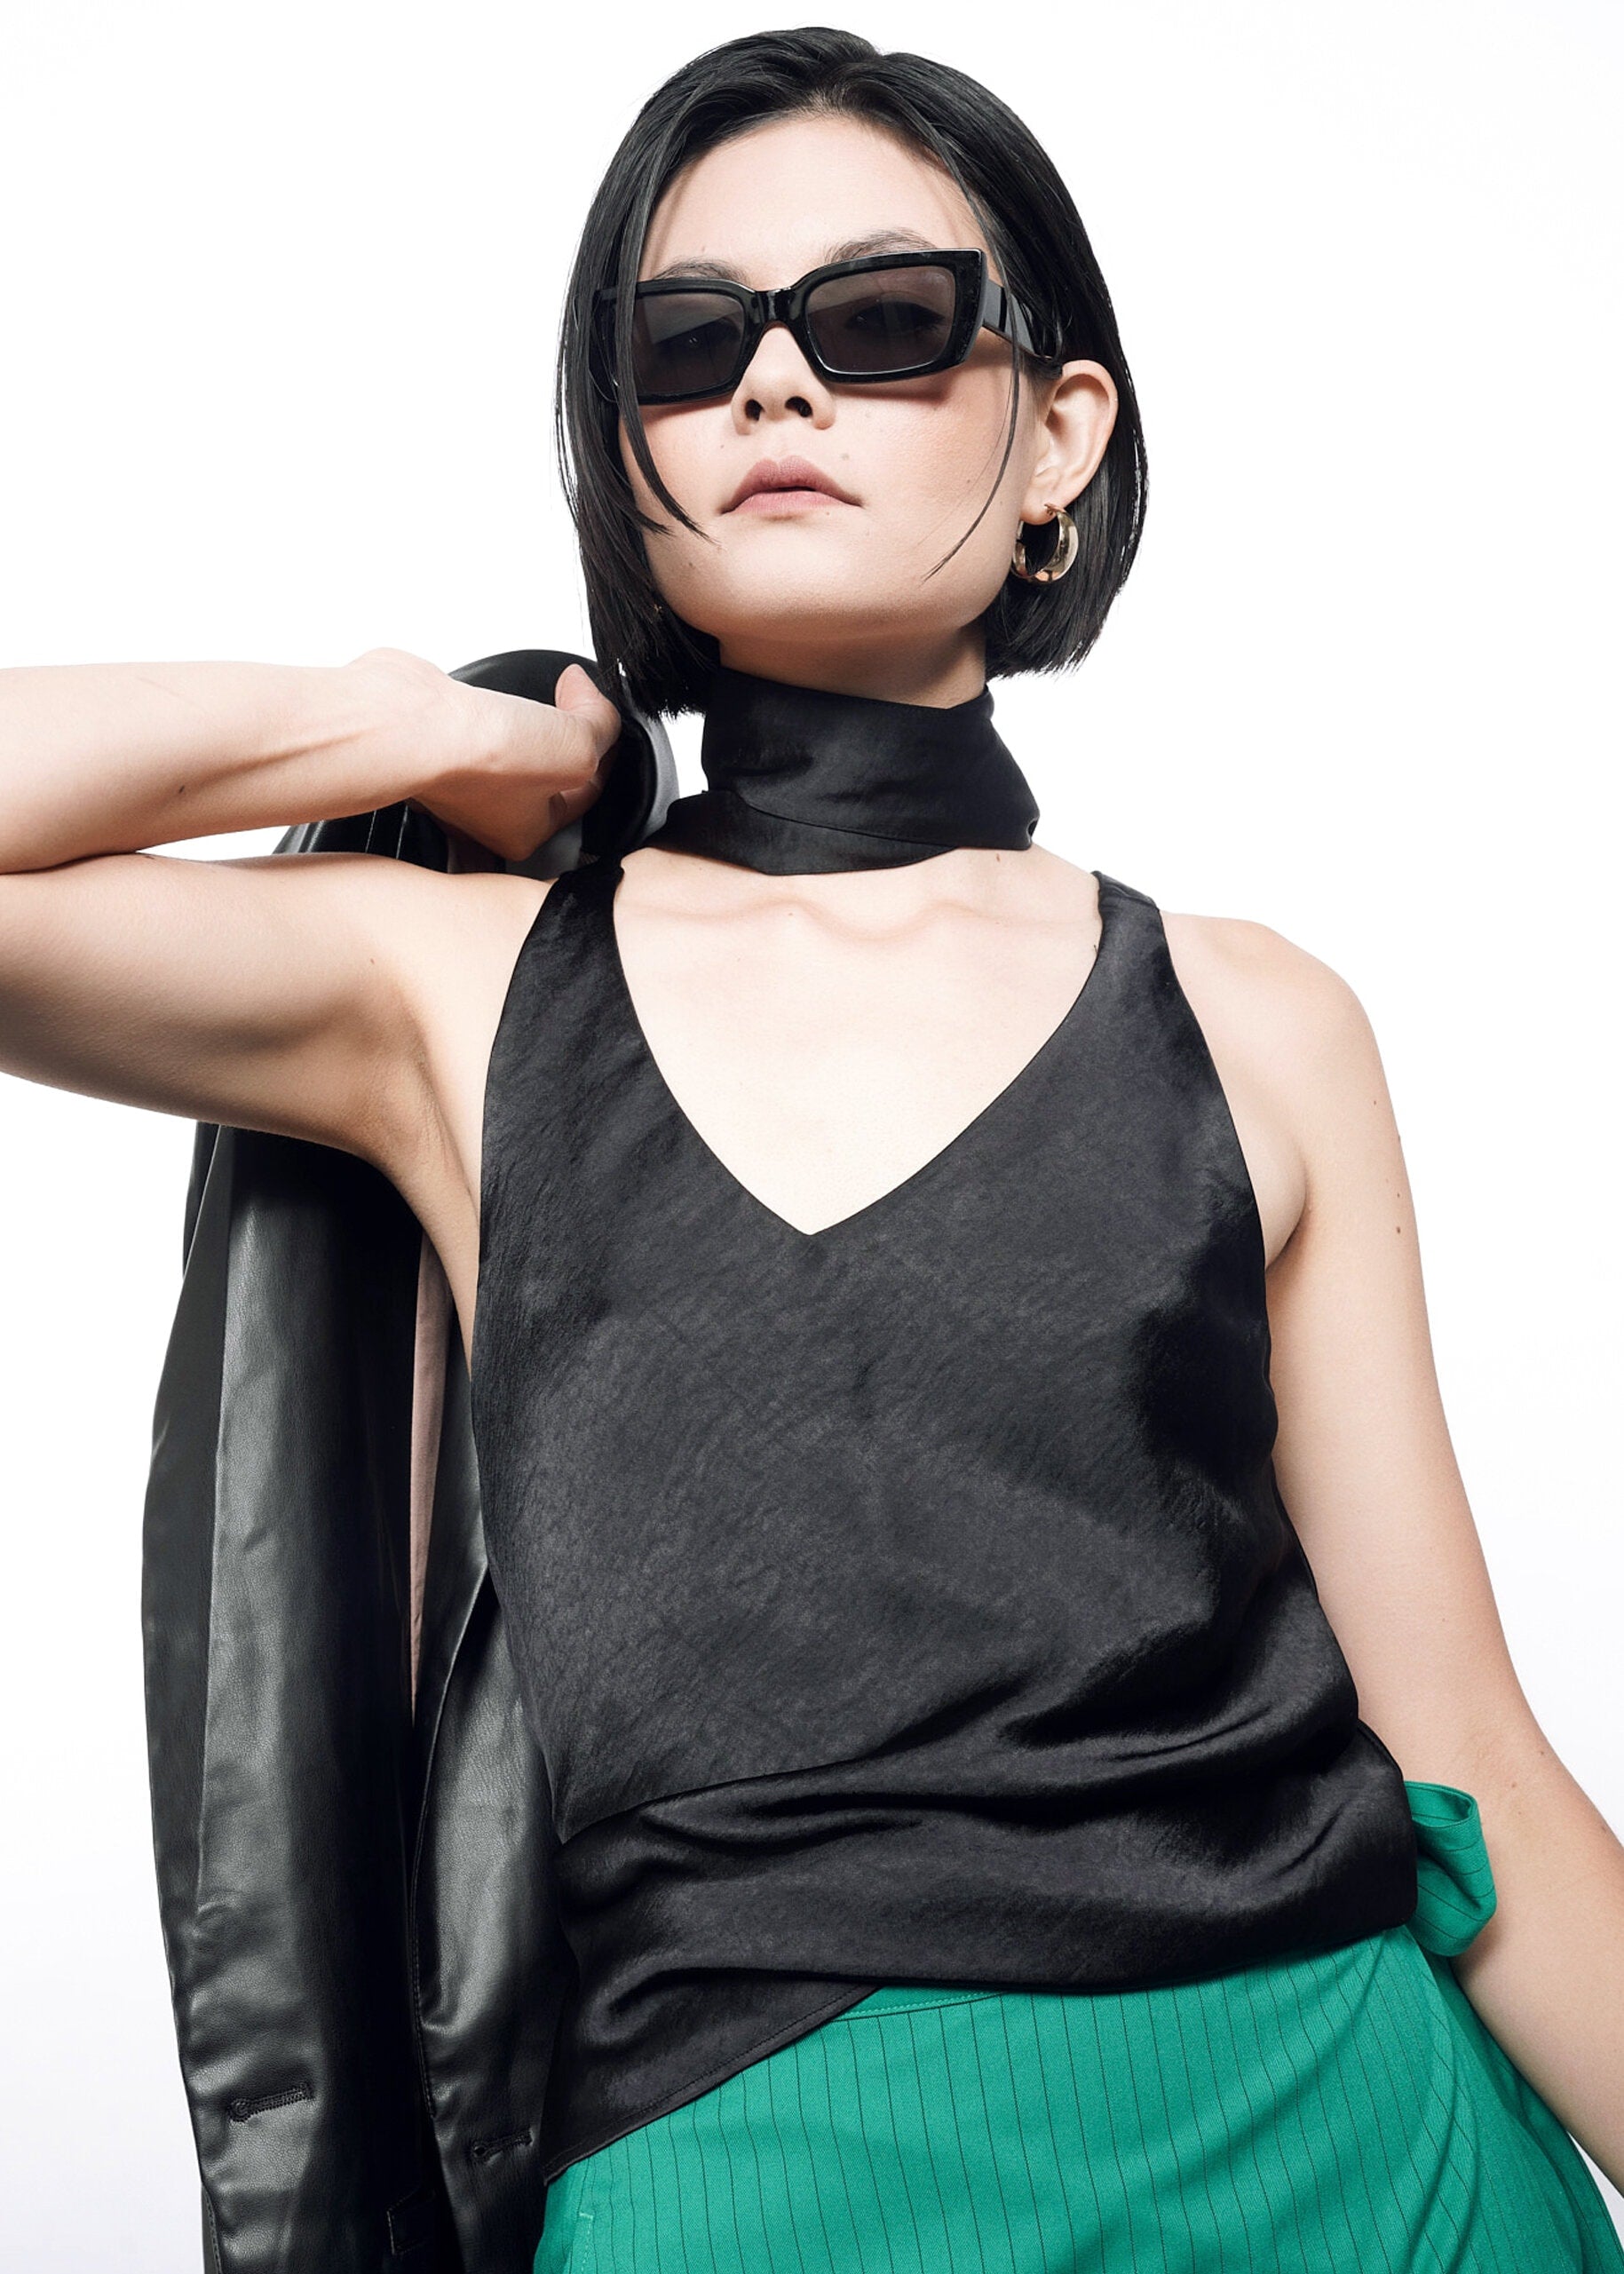 Buy Friends Like These Black Strappy Sleeveless Satin Cami Top from Next USA